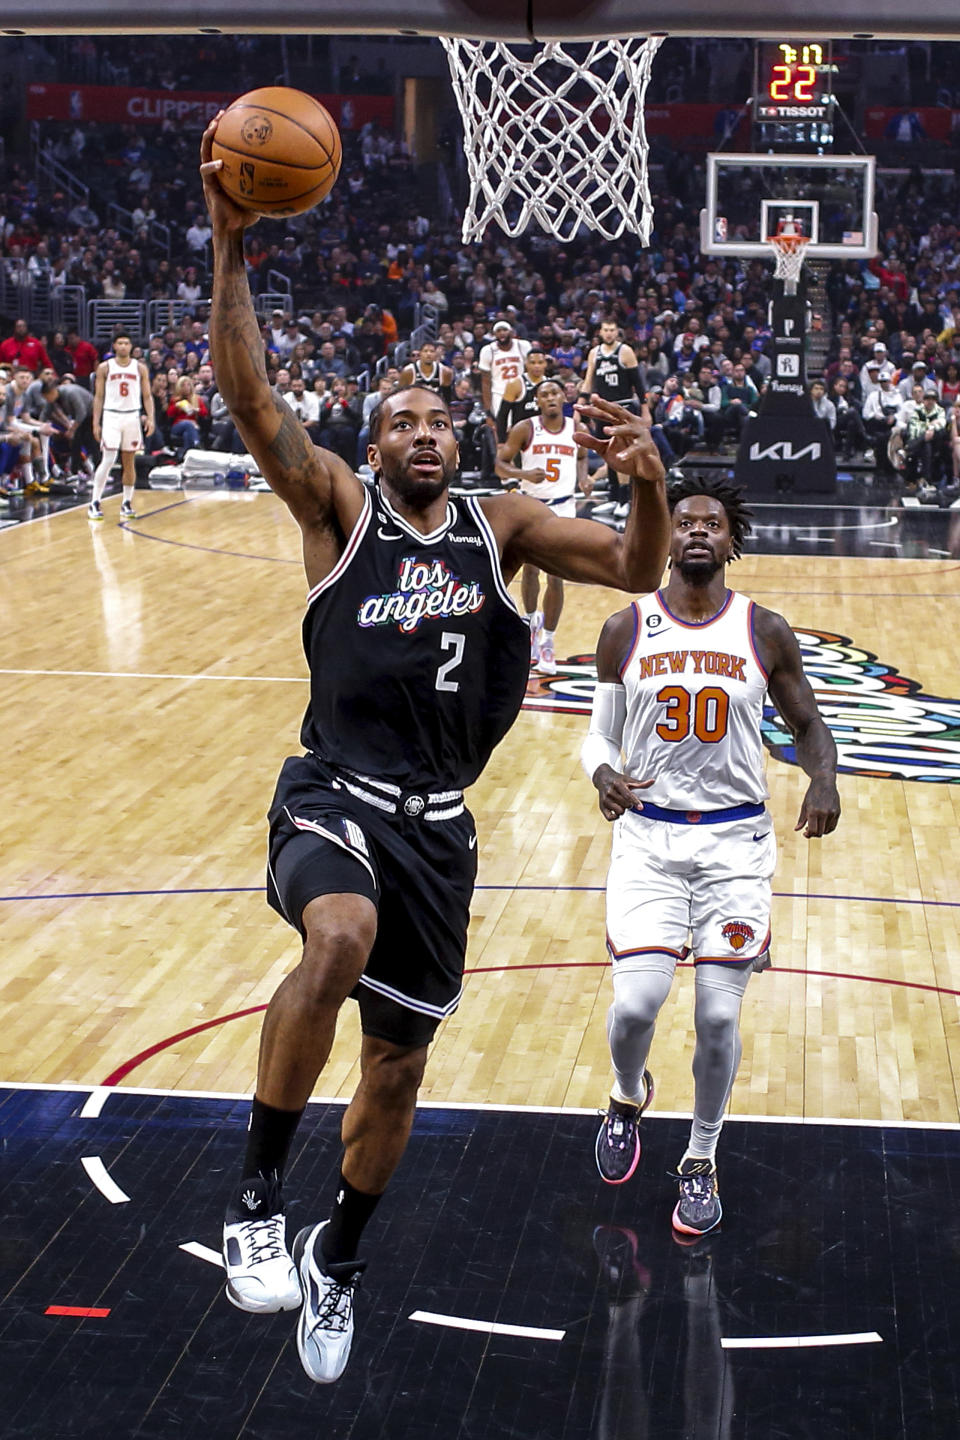 Los Angeles Clippers forward Kawhi Leonard (2) drives to basket as New York Knicks forward Julius Randle (30) looks on during the first half of an NBA basketball game Saturday, March 11, 2023, in Los Angeles. (AP Photo/Ringo H.W. Chiu)